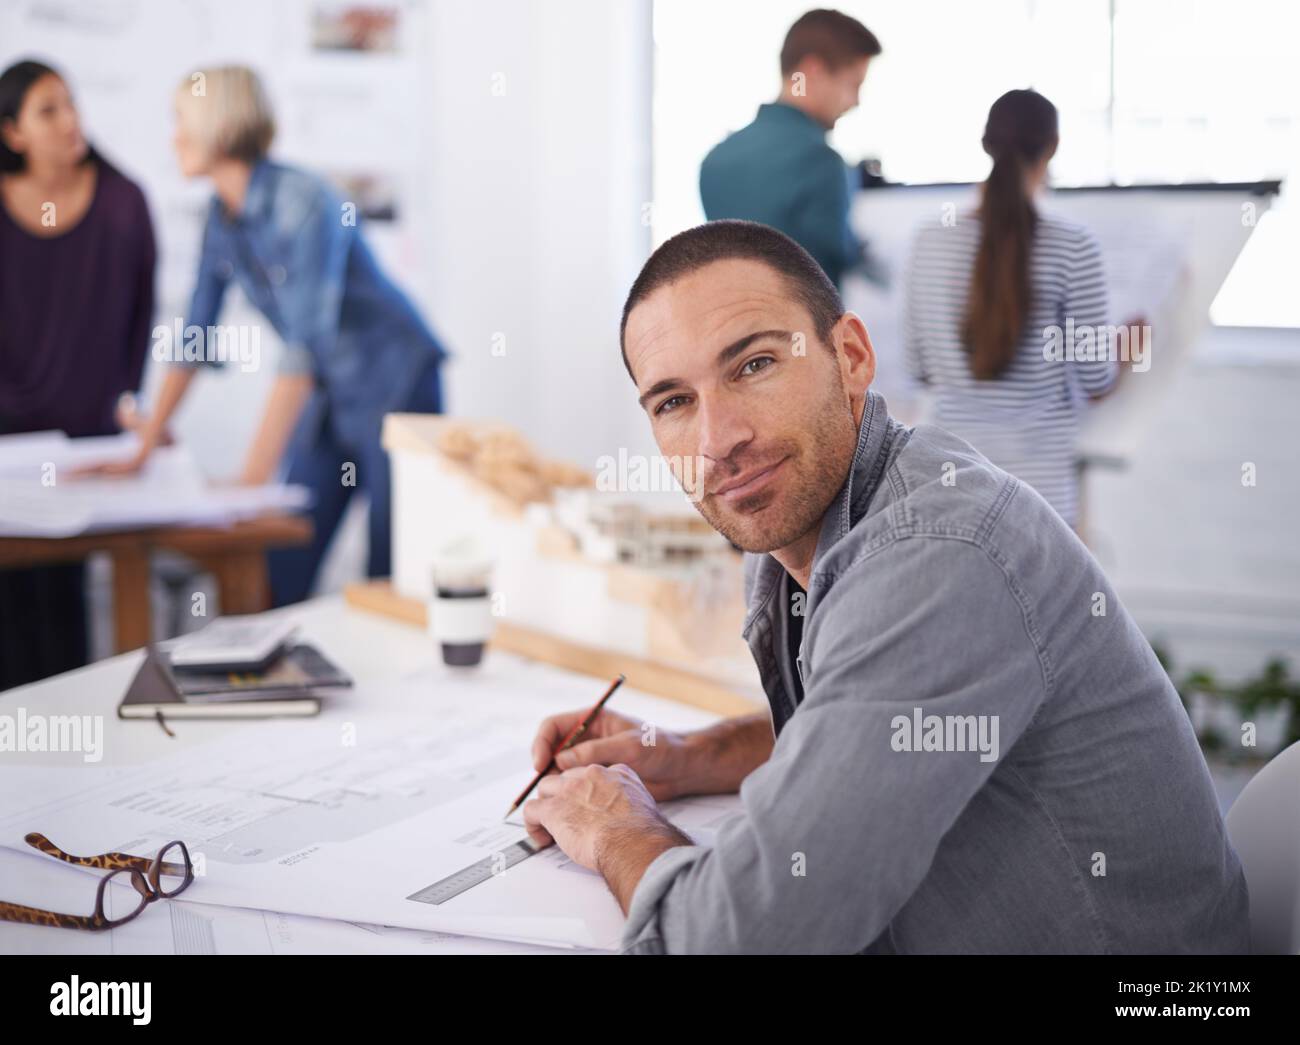 His work flows well in this environment. Portrait of a handsome architect working at his desk. Stock Photo